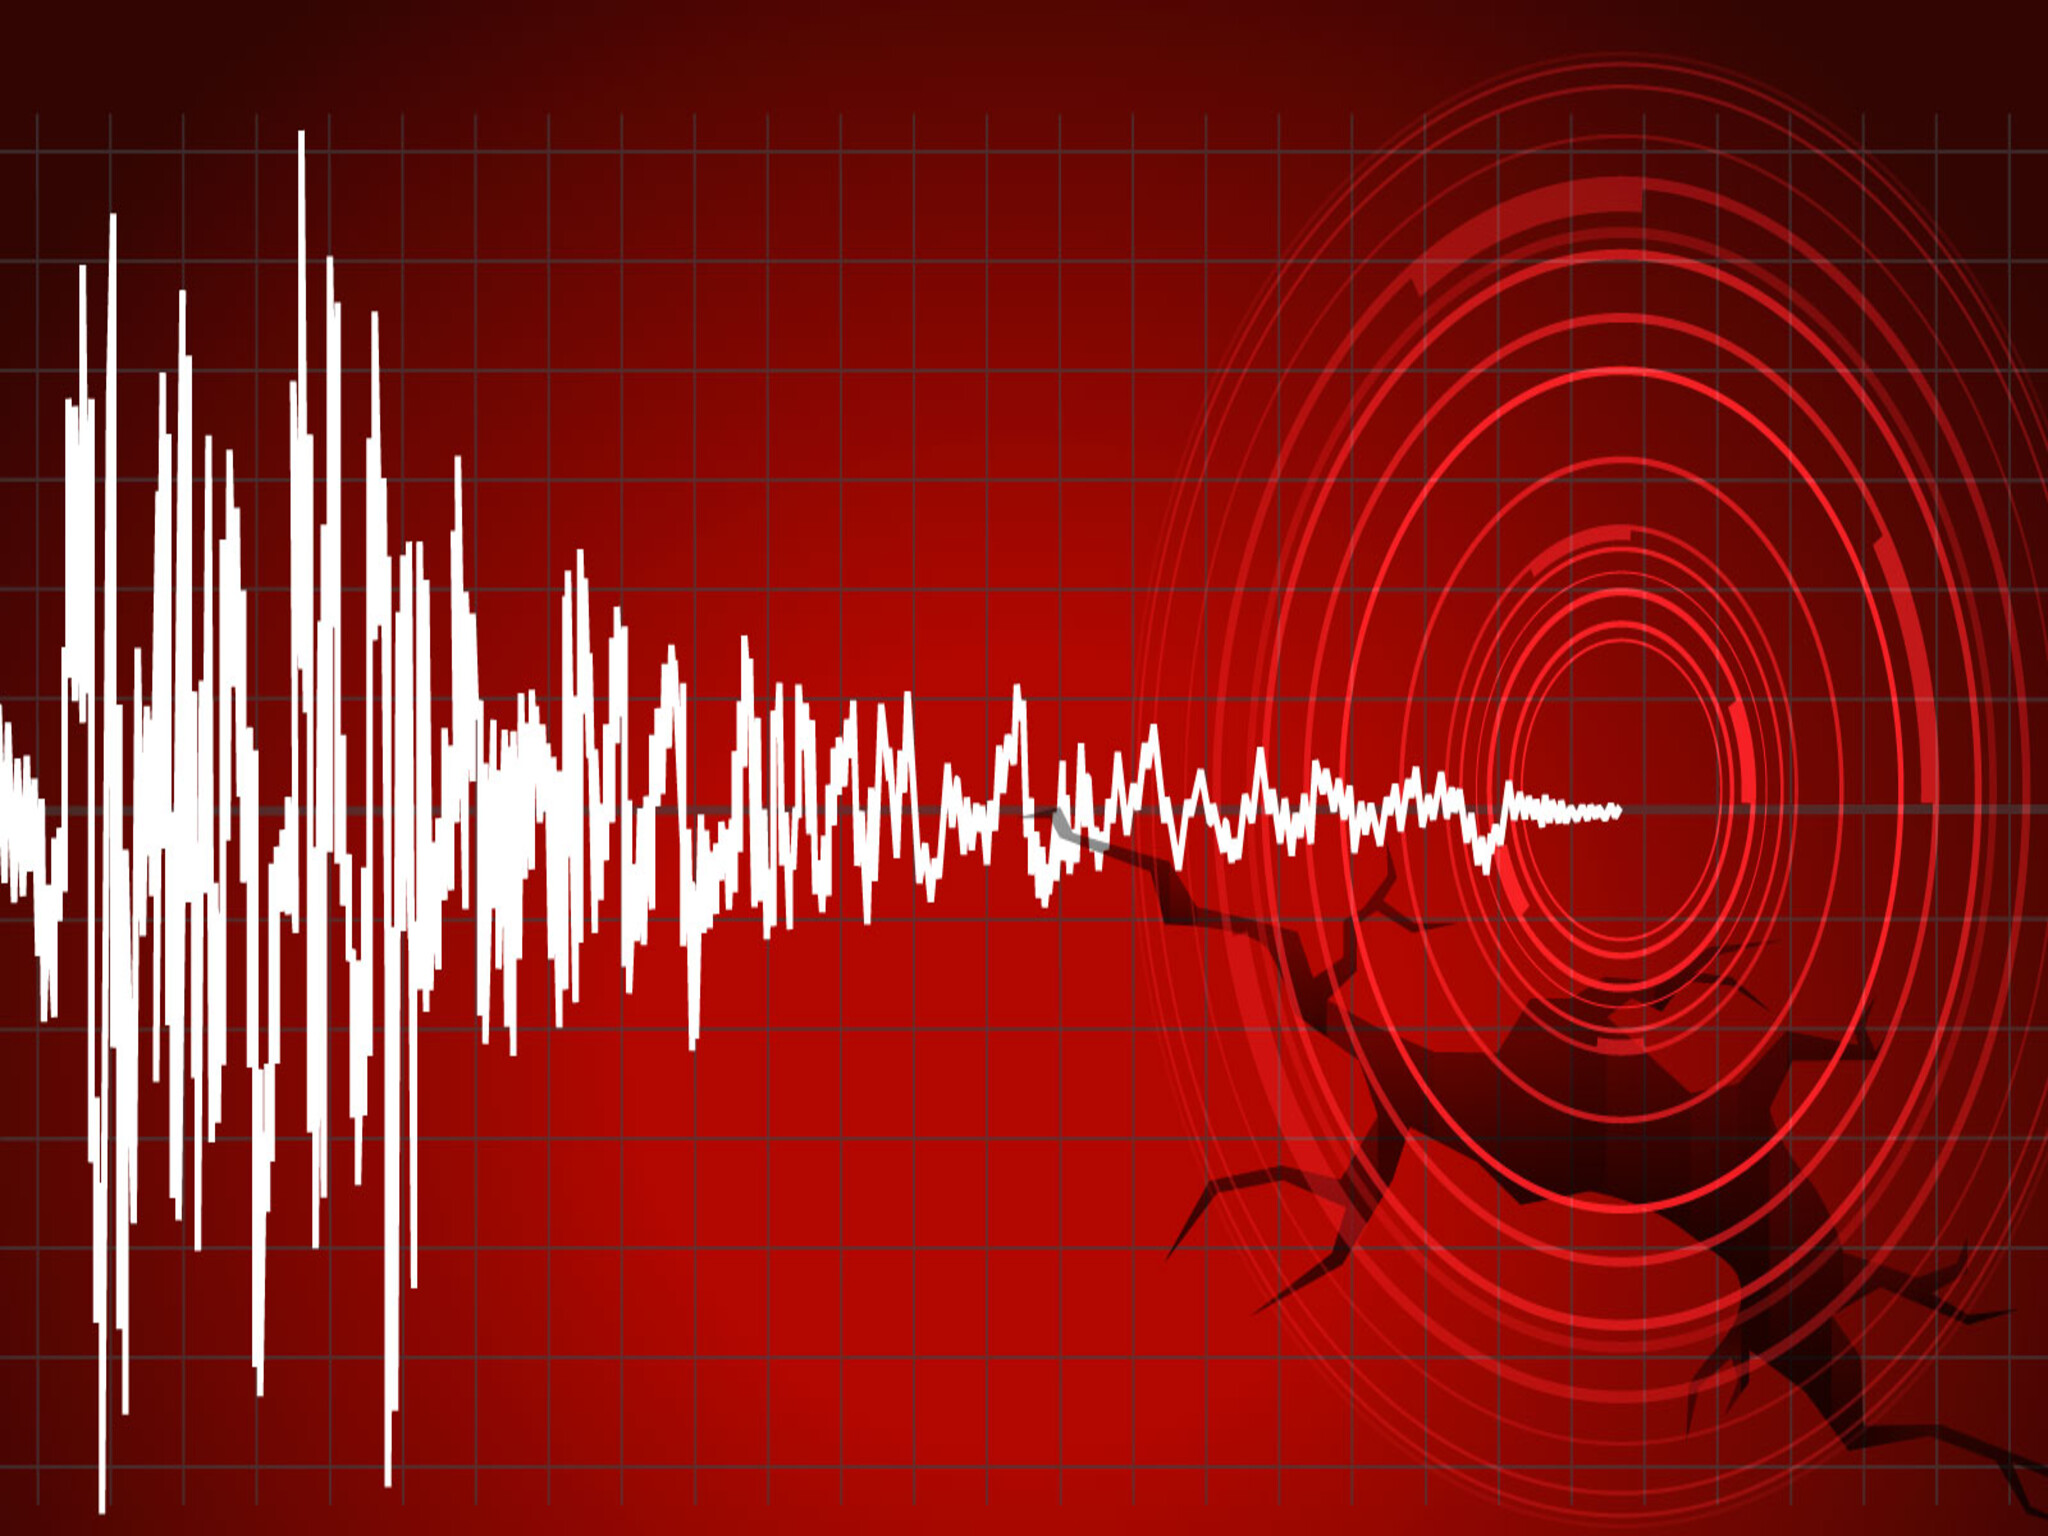 UAE earthquake: the National Centre of Meteorology records an earthquake in the UAE